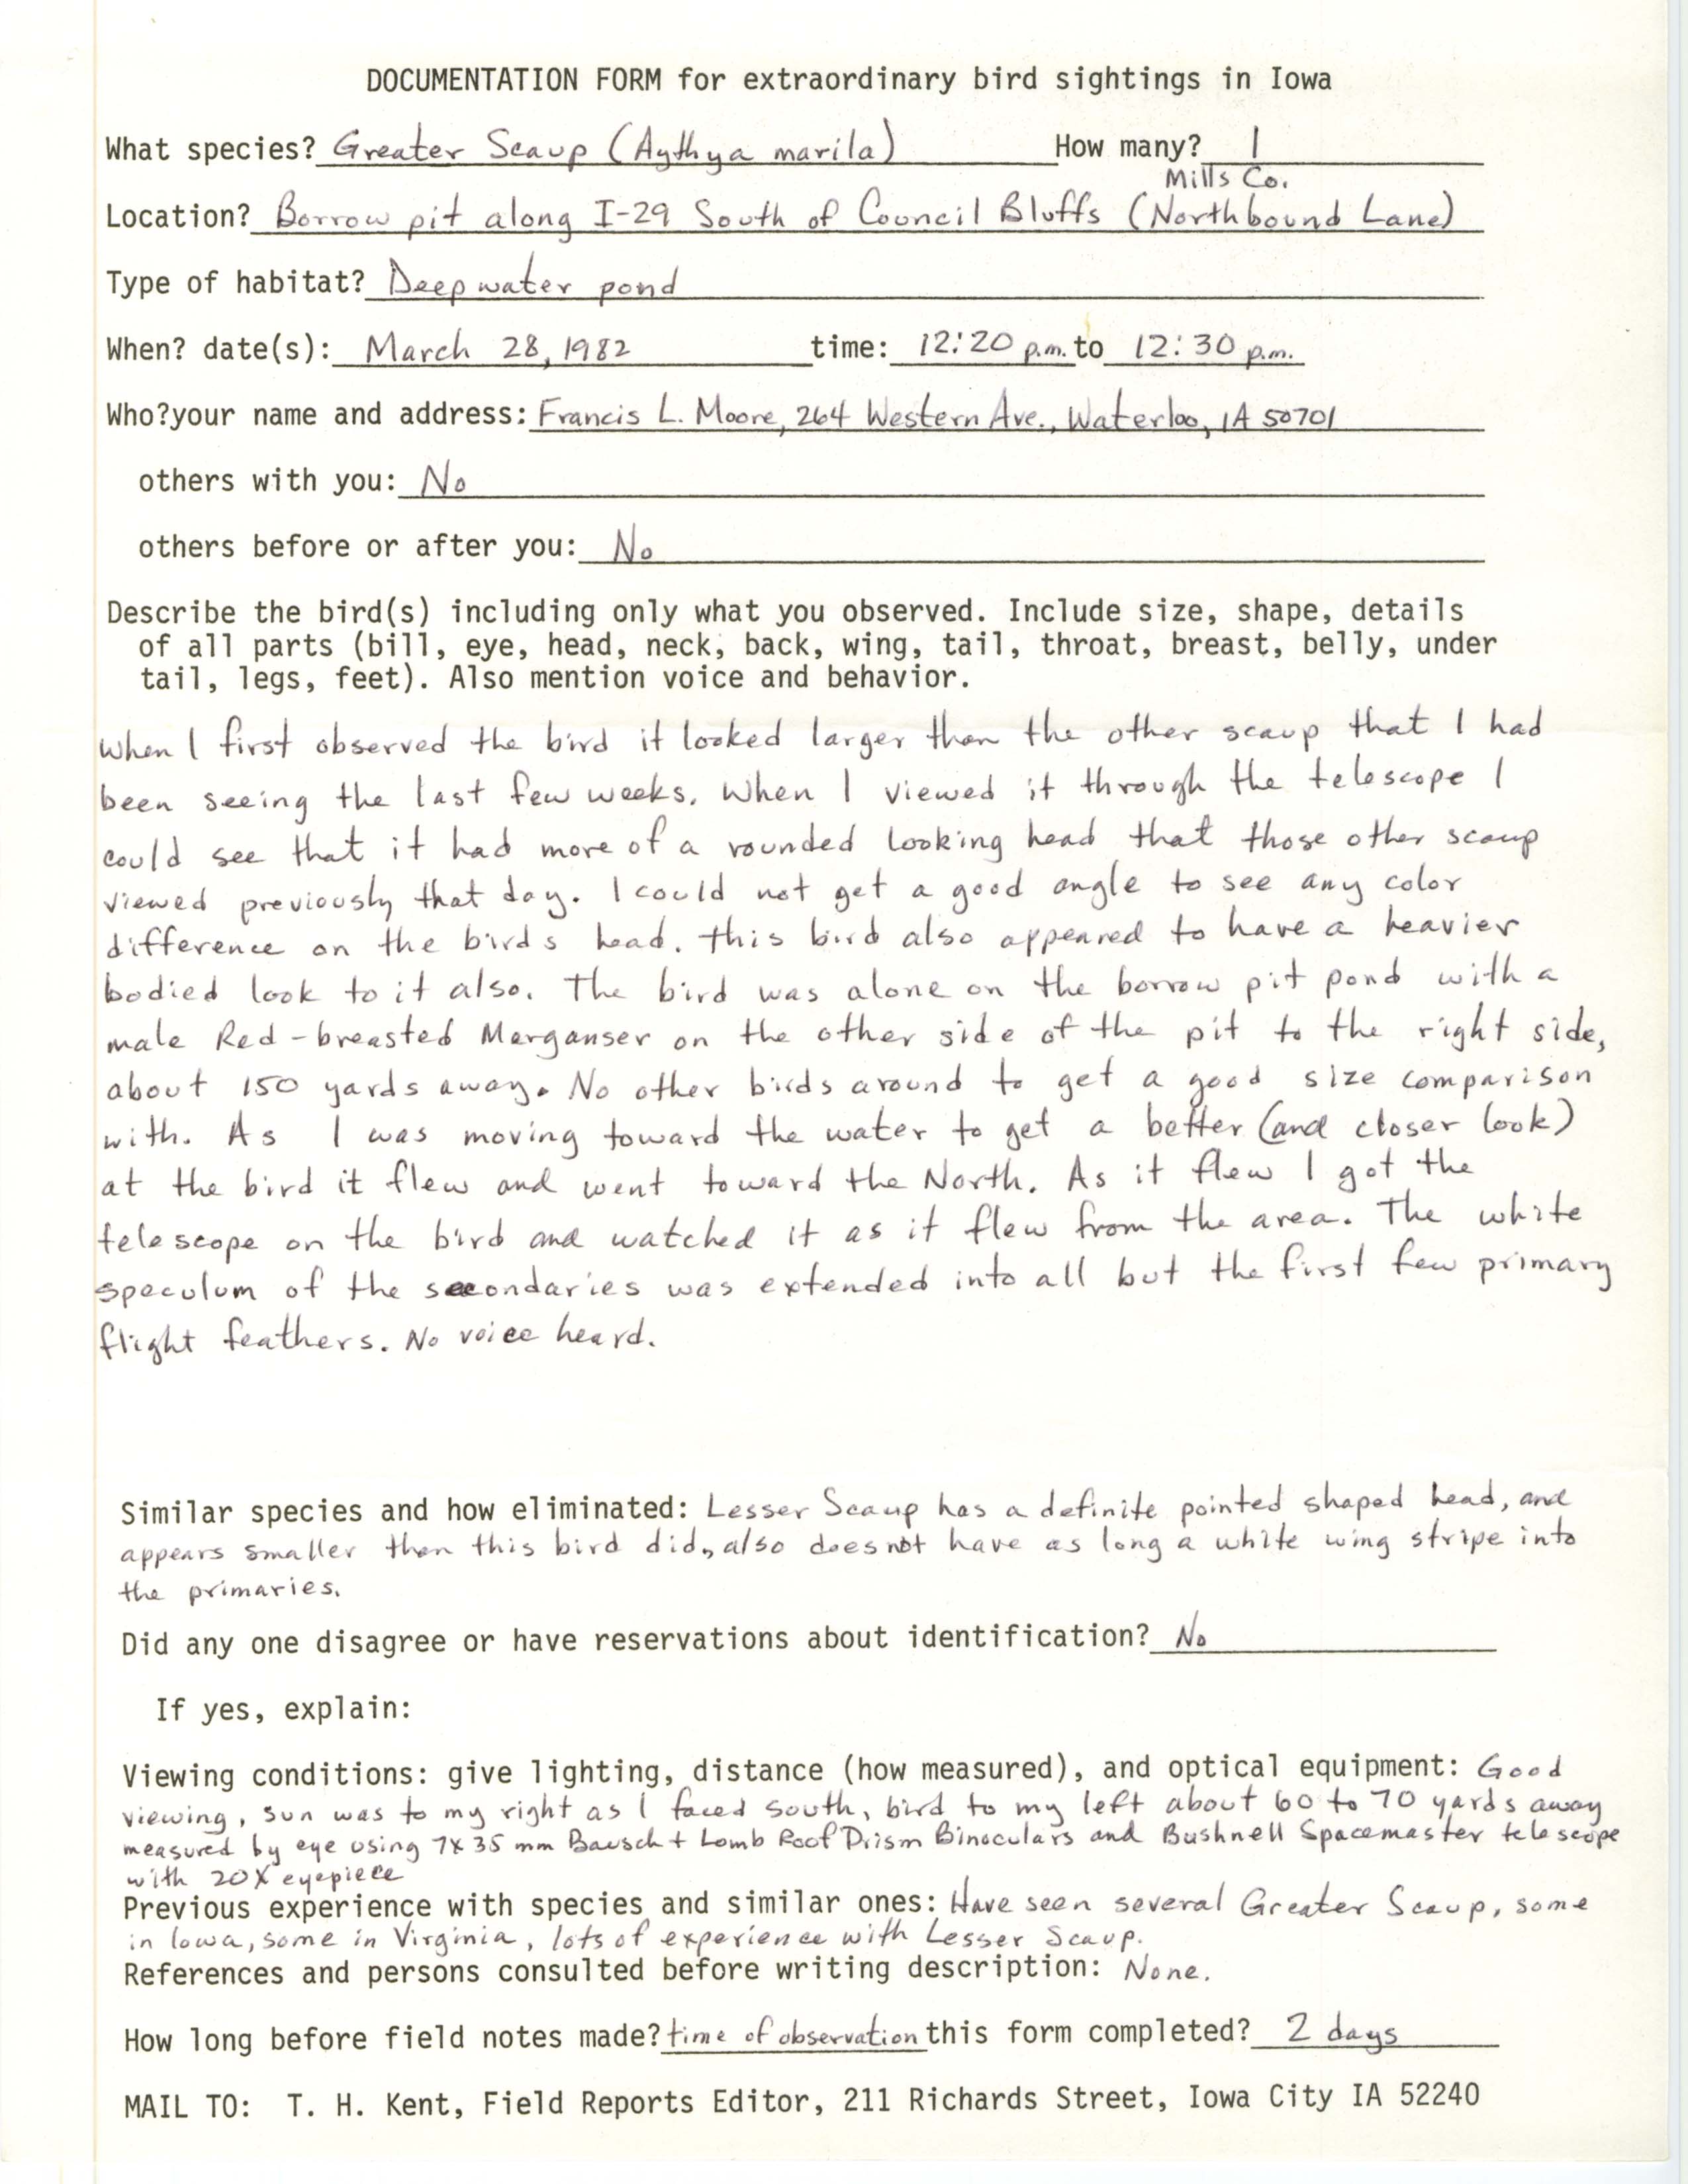 Rare bird documentation form for Greater Scaup south of Council Bluffs, 1982